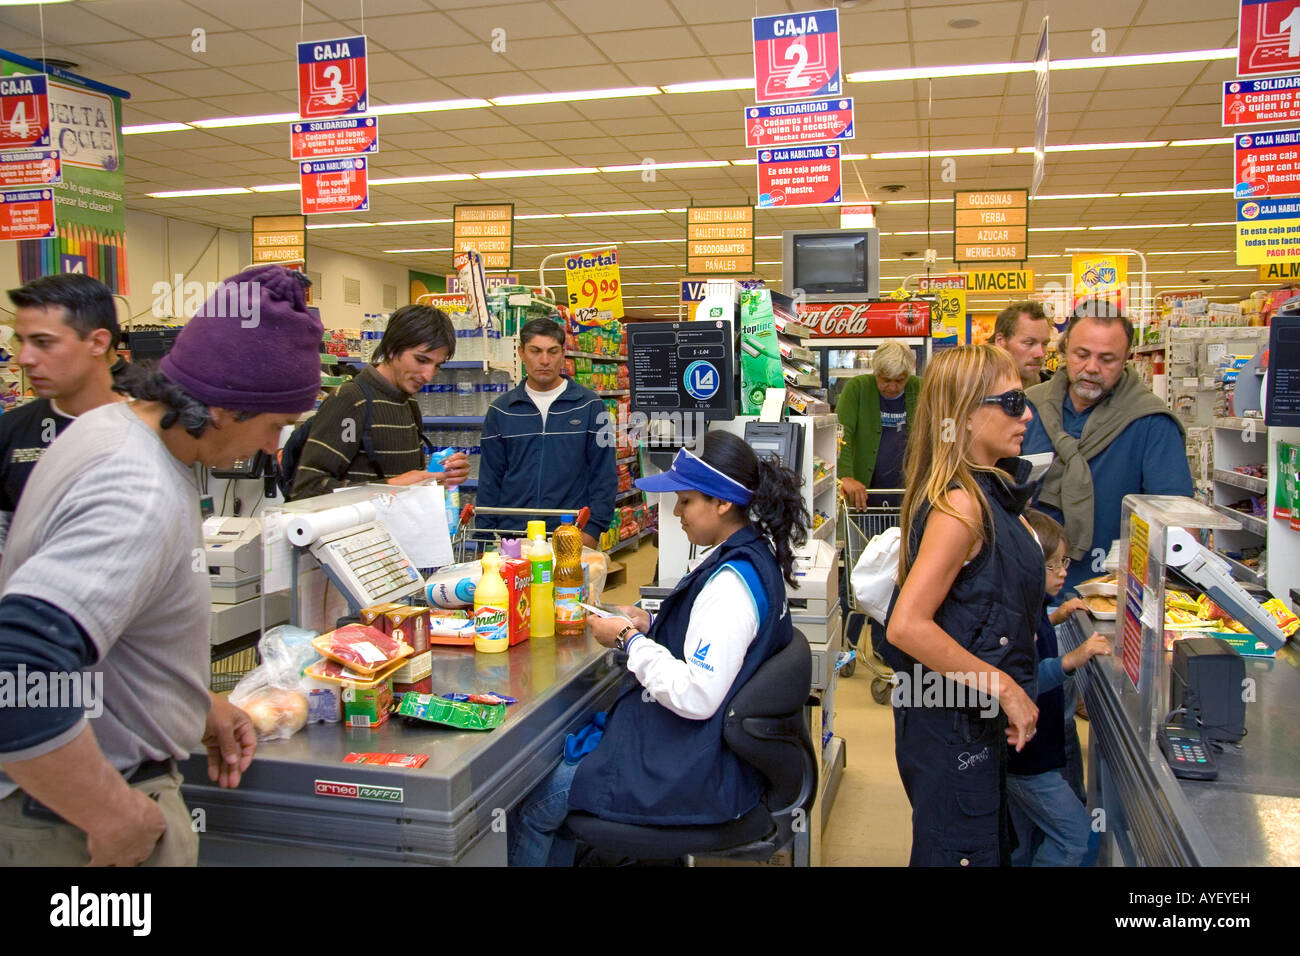 Customers in the check out line of a super market in El Calafate